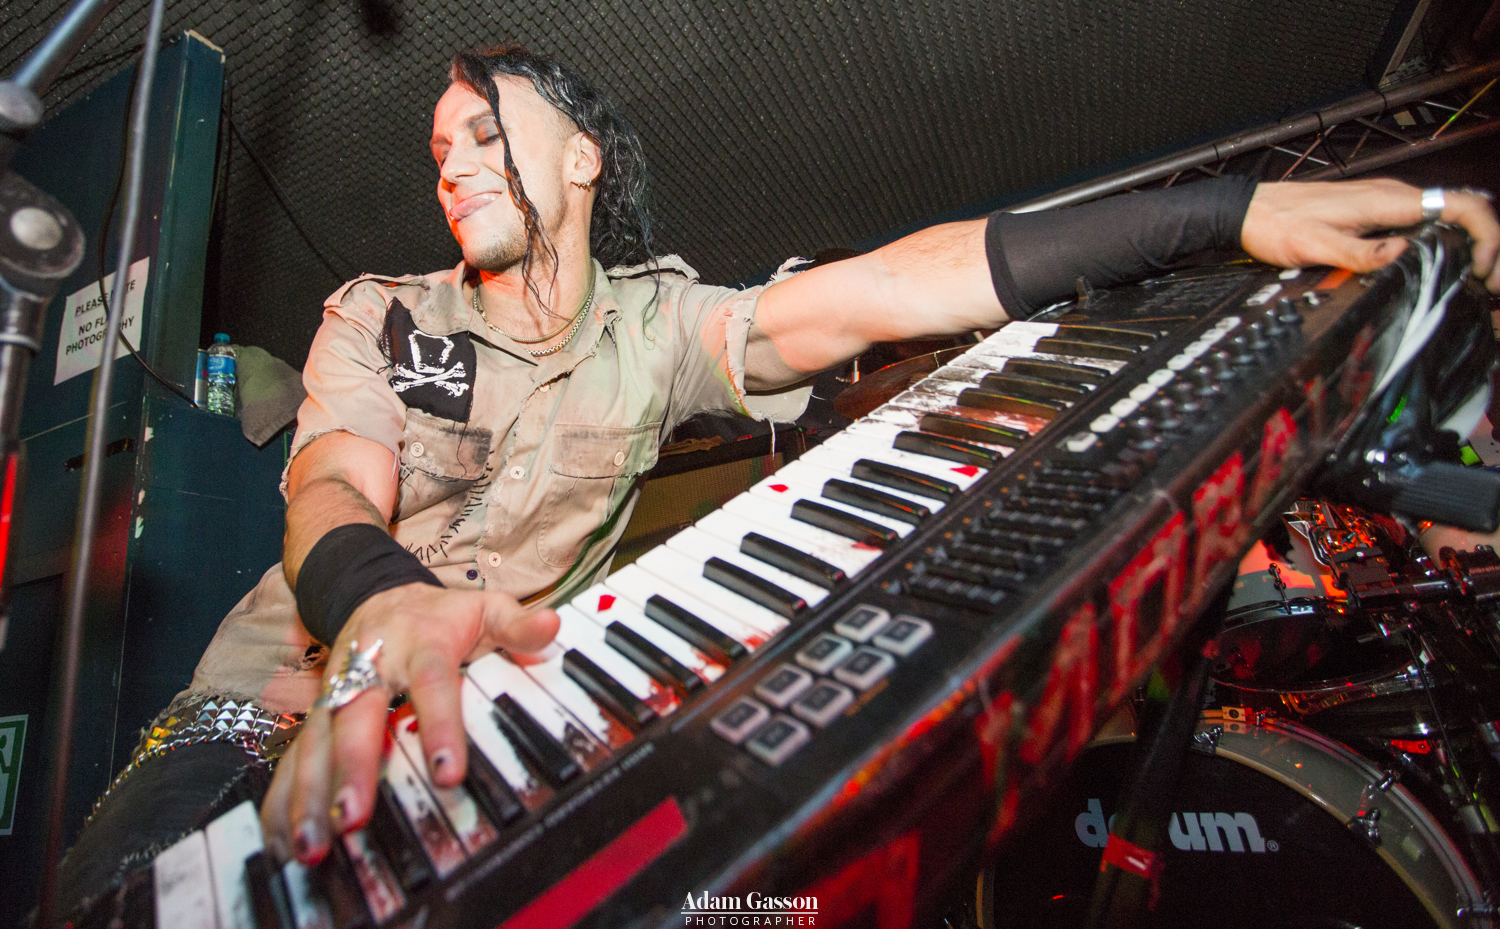 The Defiled live photos